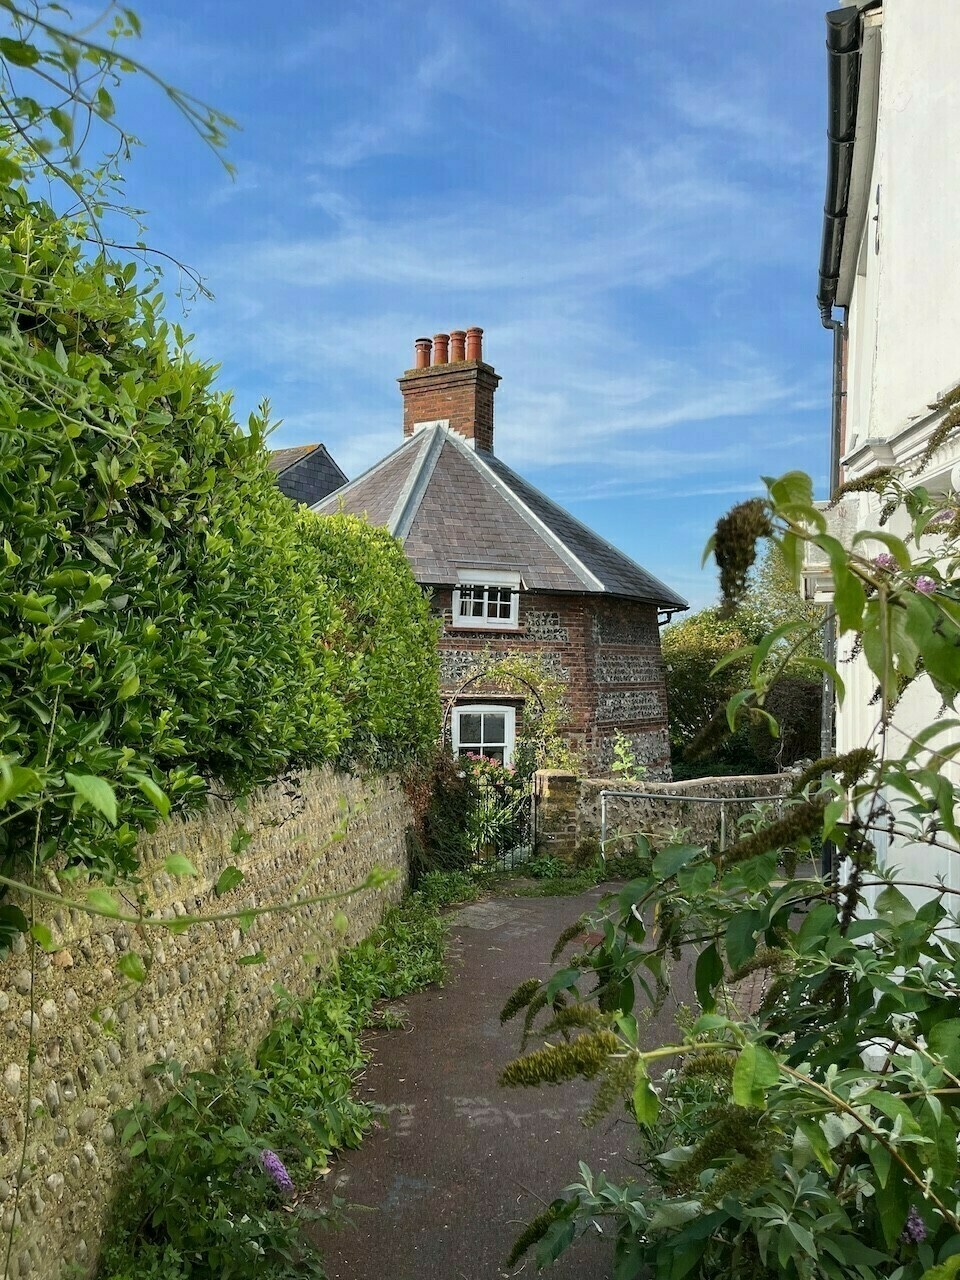 View down a narrow alley (twitten) lined with flowers and a hedge, towards a hexagonal brick and flint cottage, which was once the base of a windmill.